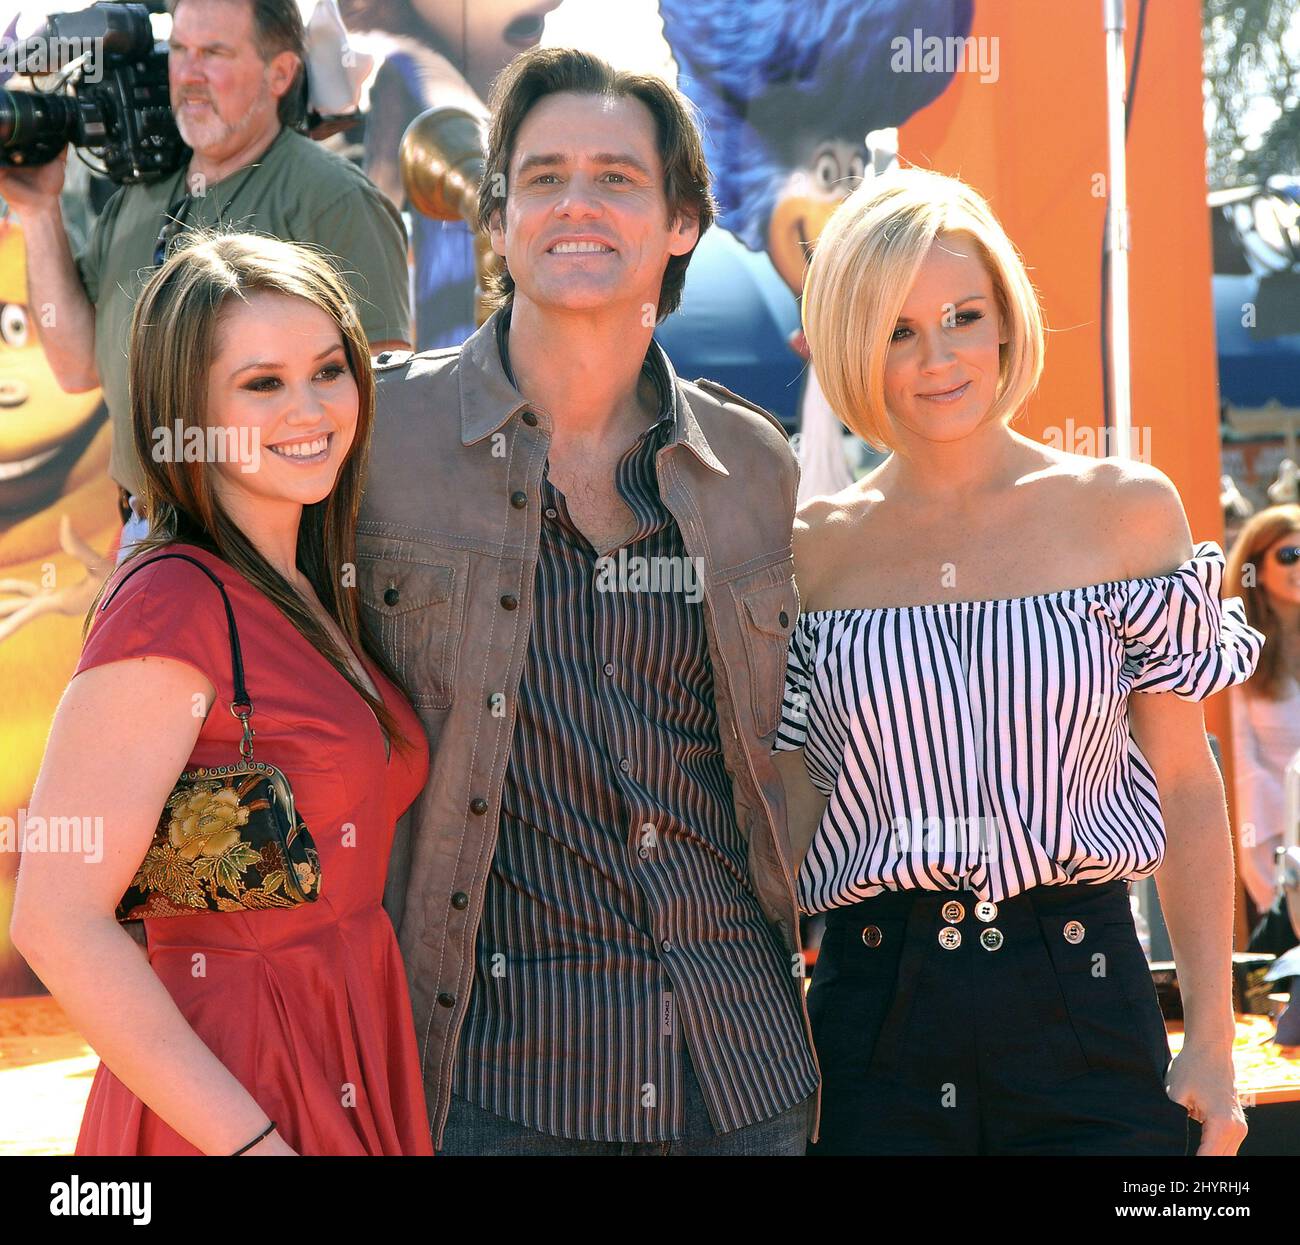 Jim Carrey, daughter Jane Carrey and Jenny McCarthy arriving at the premiere of 'Horton Hears A Who' held at the Mann Village Theatre in Westwood, California. Stock Photo